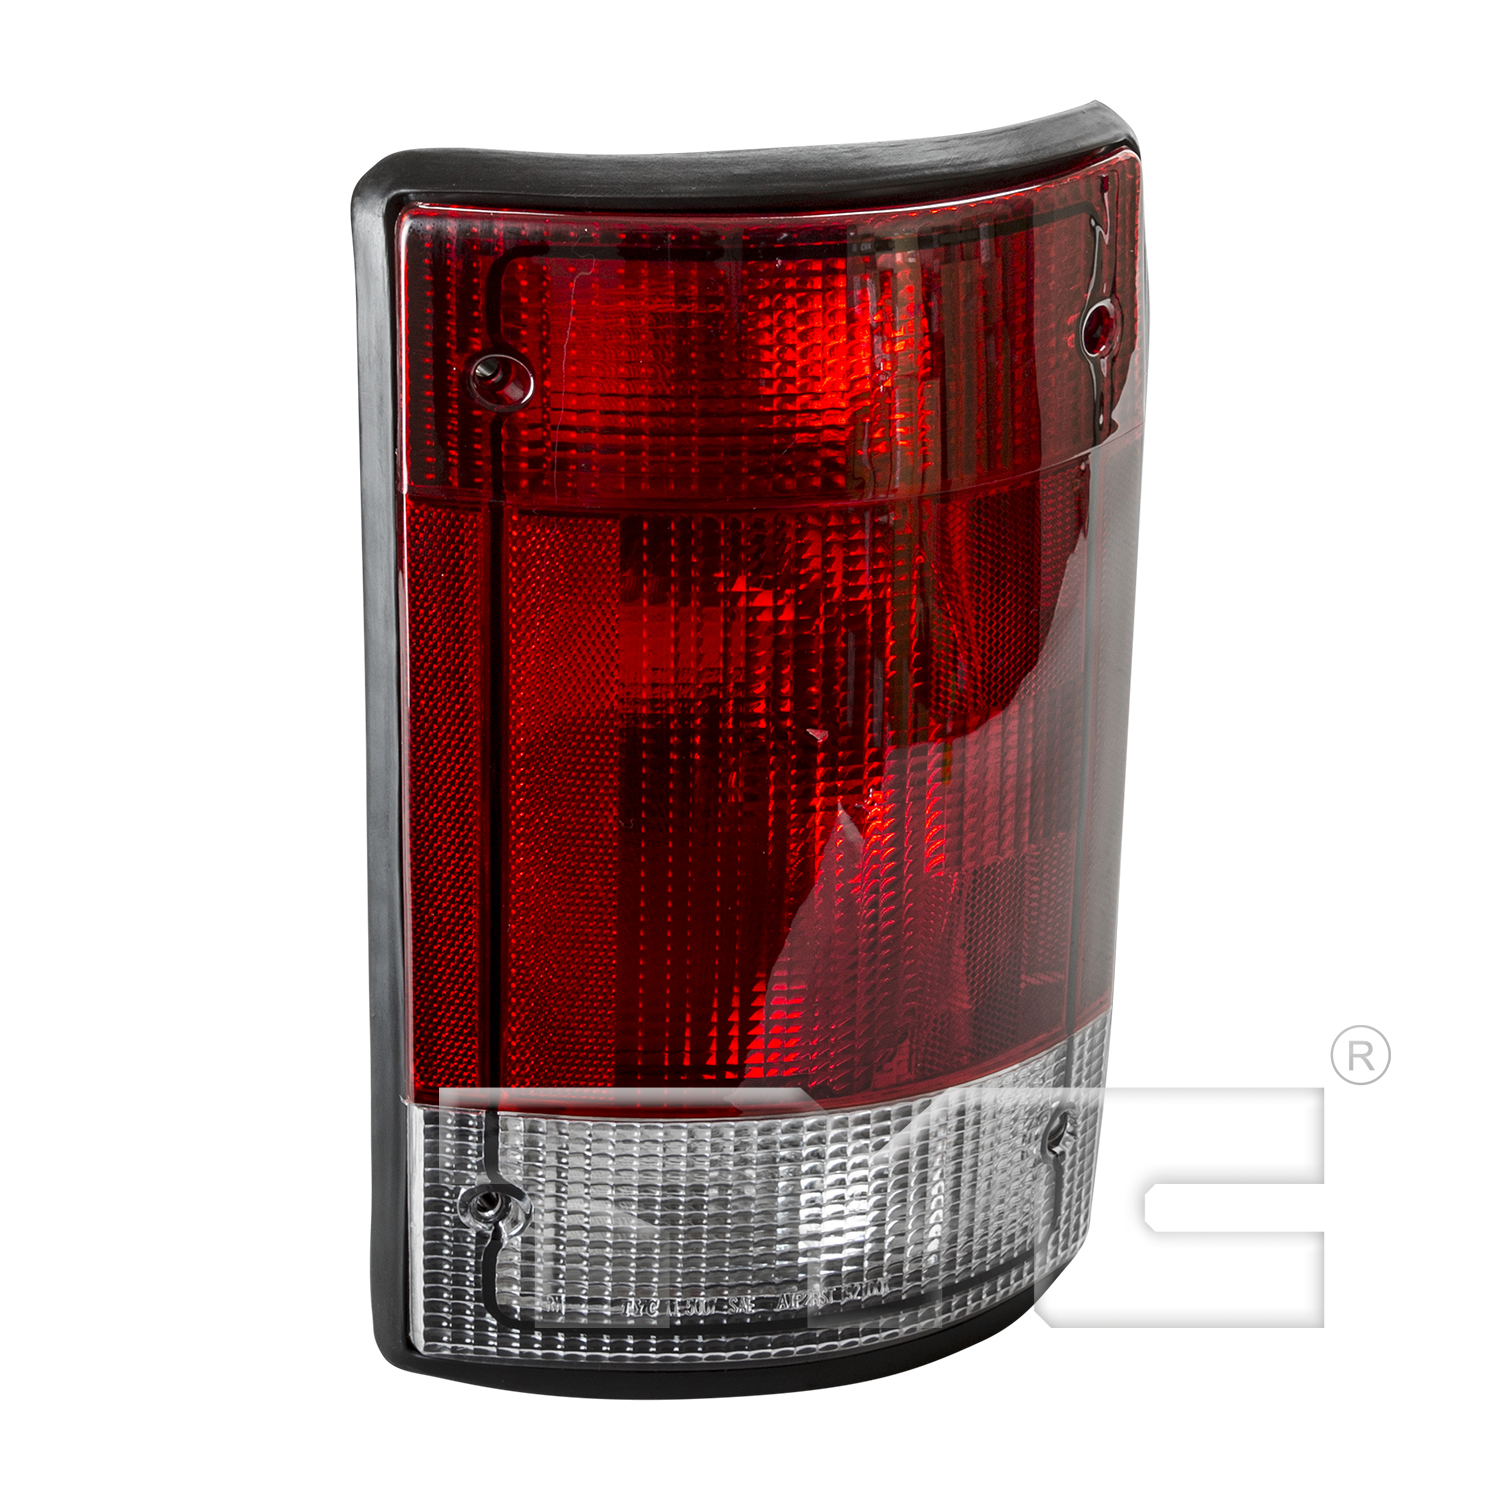 Aftermarket TAILLIGHTS for FORD - E-150 CLUB WAGON, E-150 CLUB WAGON,04-05,RT Taillamp assy